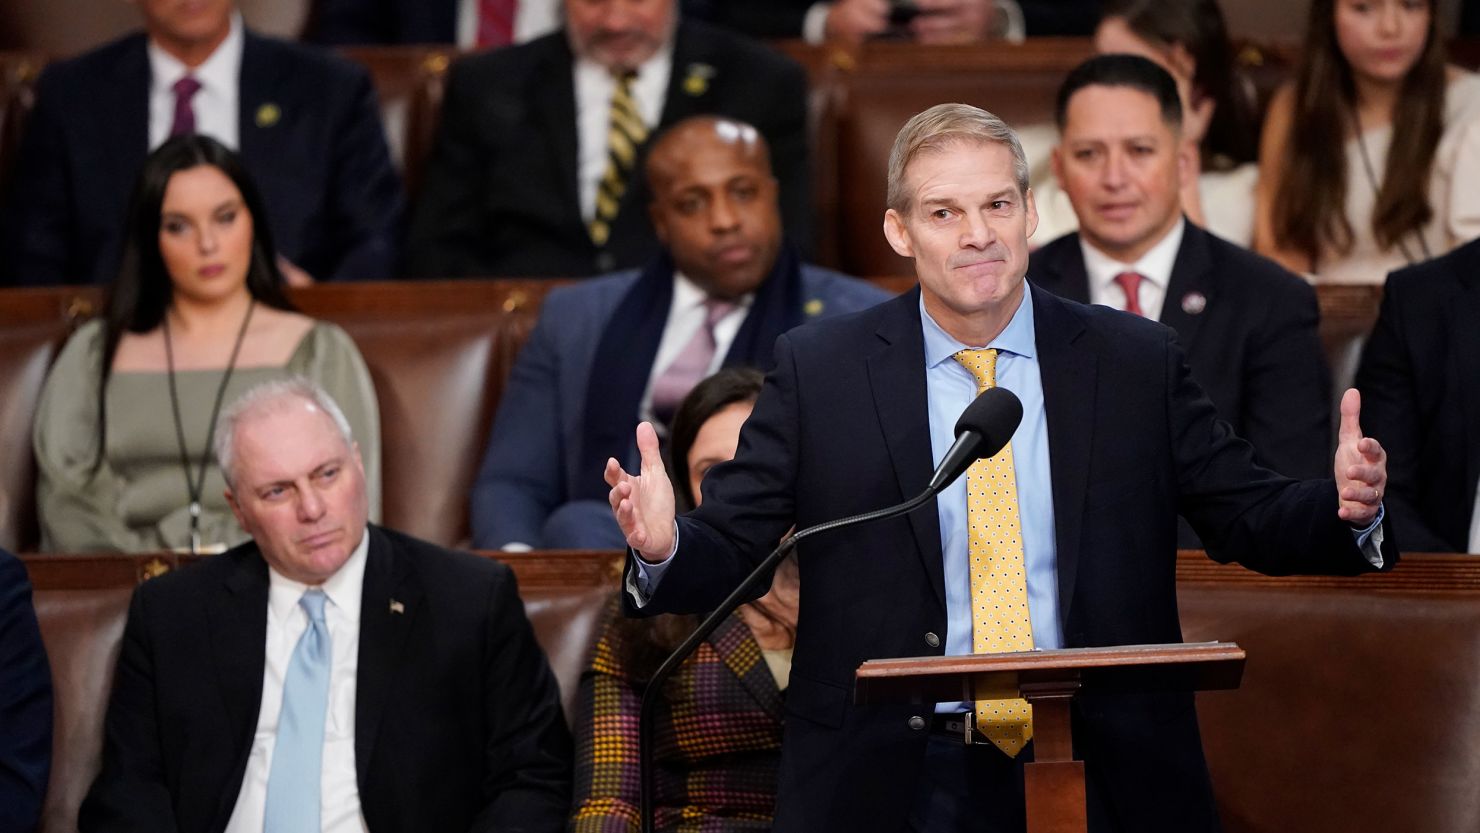 Rep. Jim Jordan speaks on Kevin McCarthy's behalf for the House speakership on the first day of the new Congress. Jordan is now chairman of the powerful House Judiciary Committee.